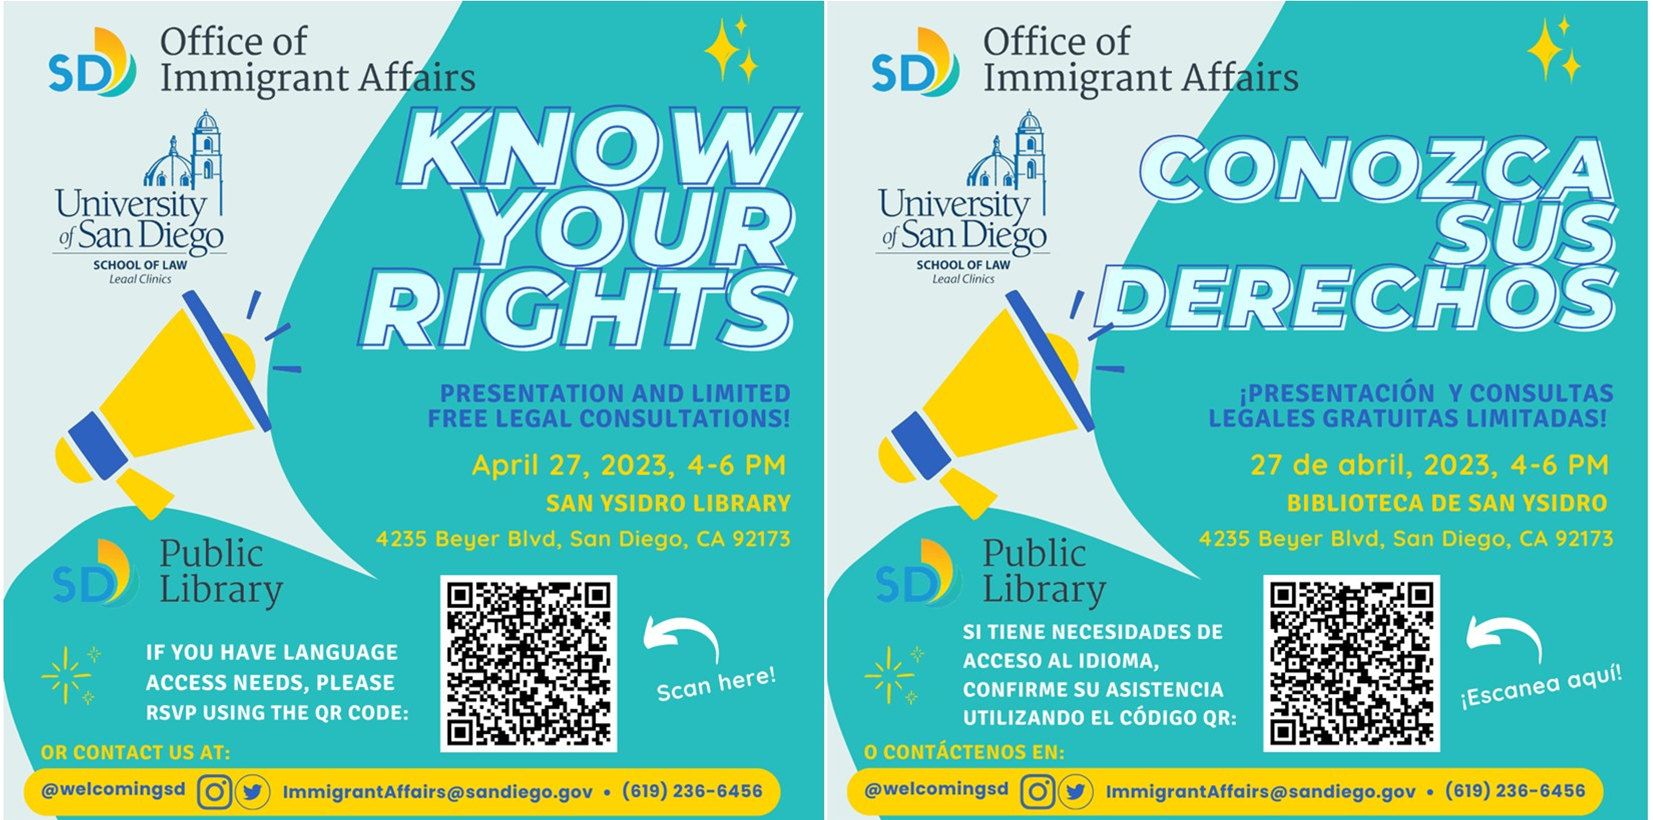 Flyer event for Know Your Rights event by the Office of Immigrant Affairs